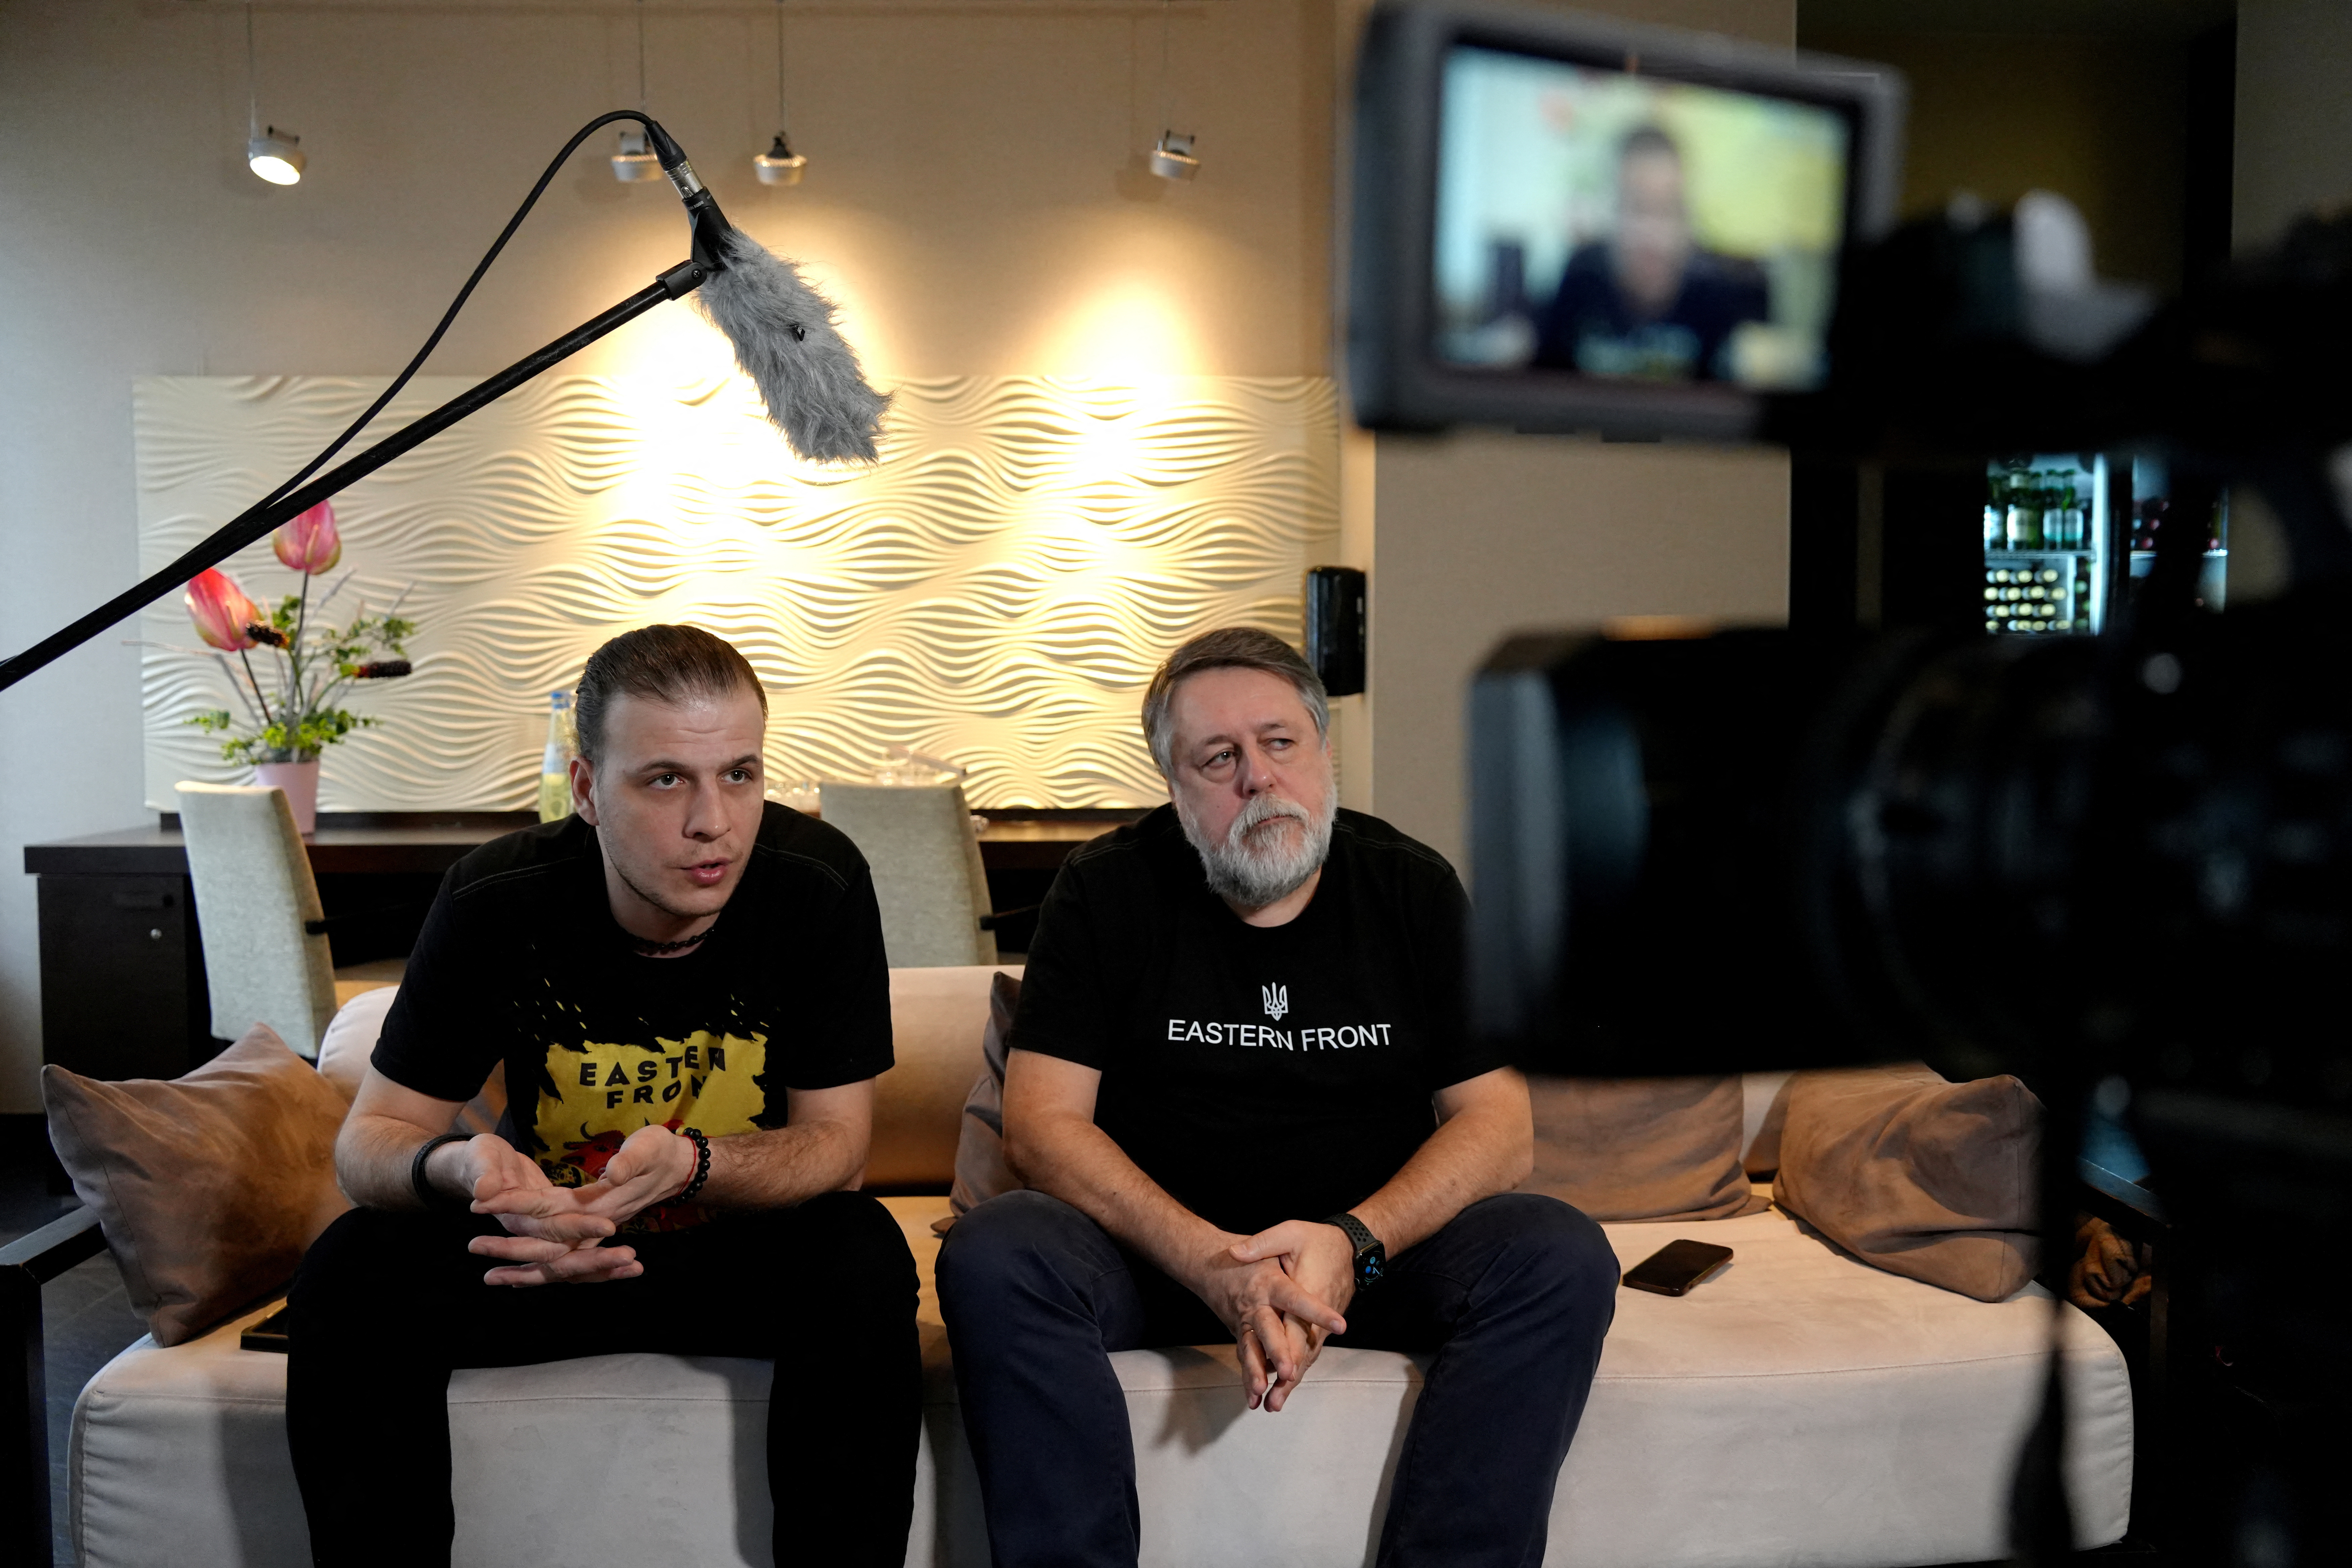 Directors Vitaly Mansky and Yehven Titarenko speak about the movie 'Eastern Front' during a Reuters interview in Berlin